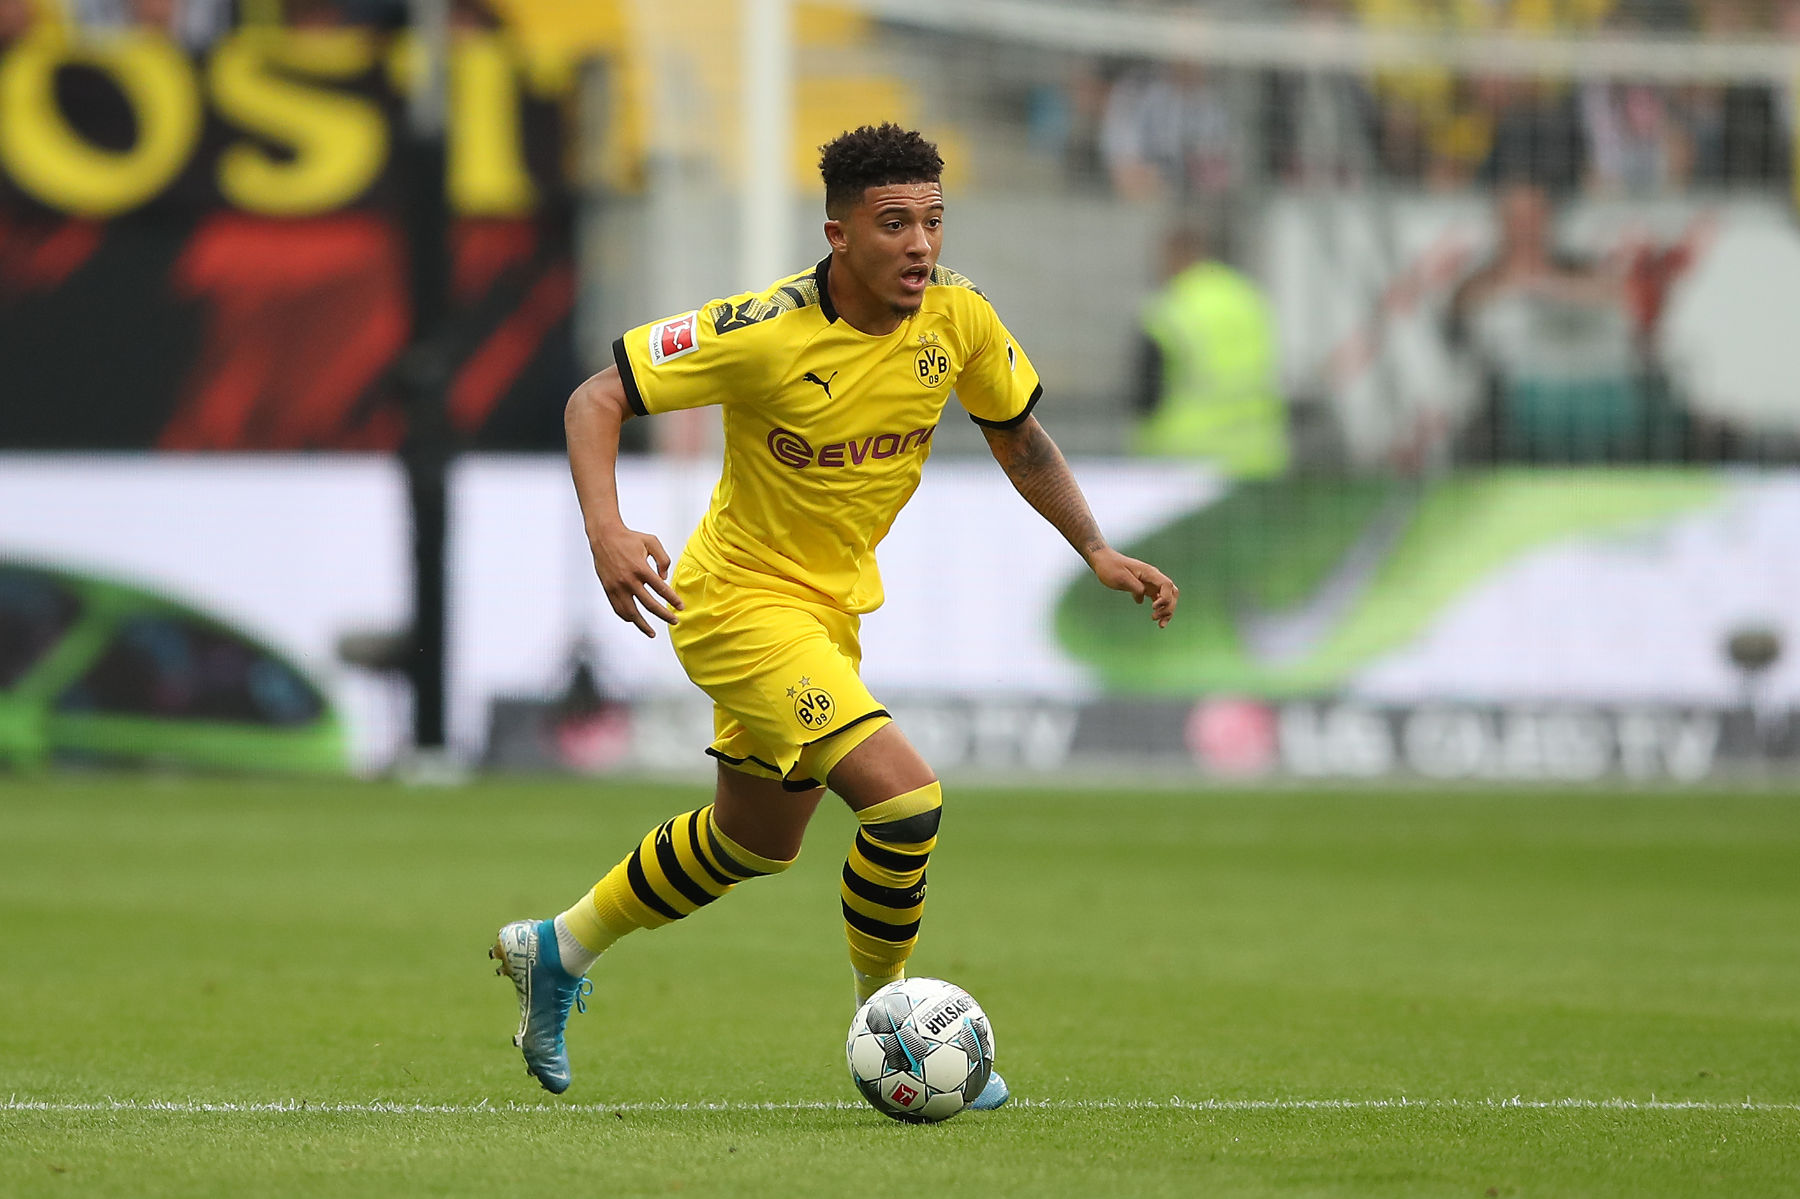  Jadon Sancho dribbles the ball past PSG defenders during a match.